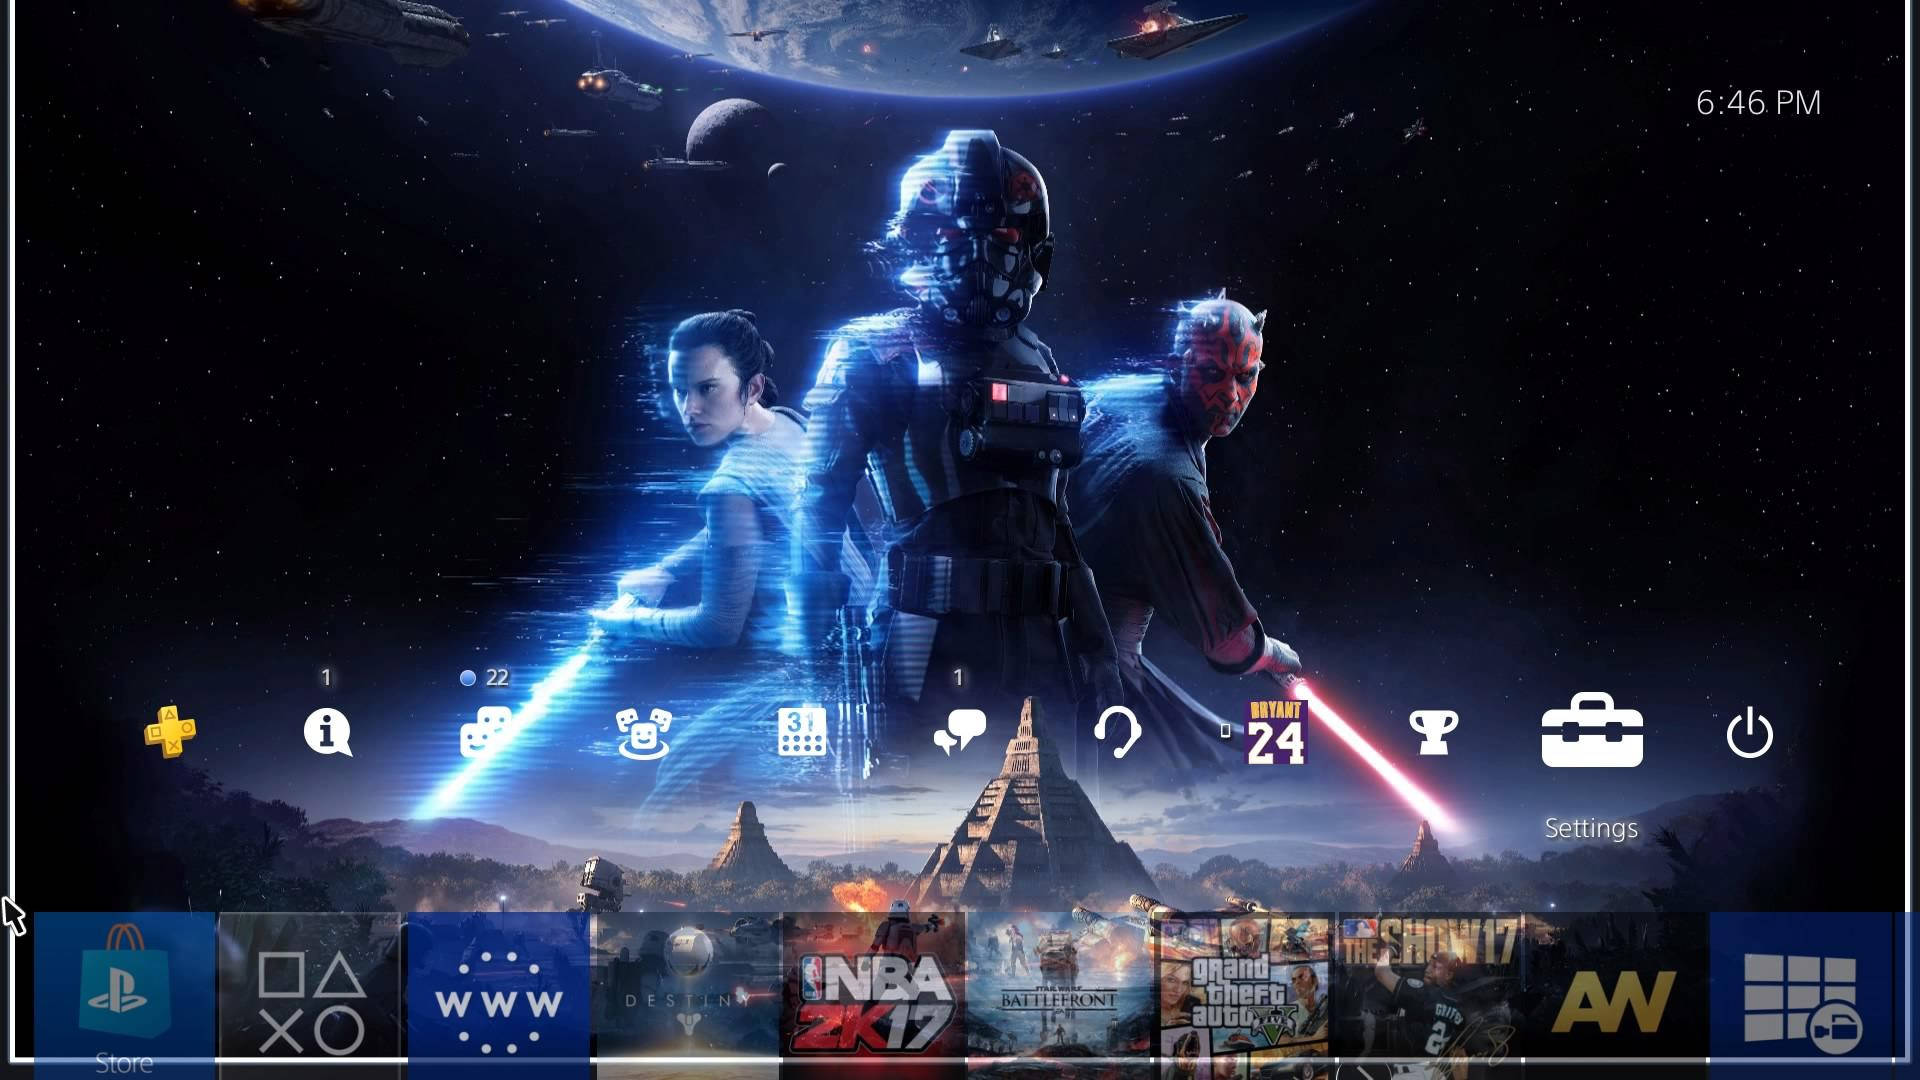 Relive epic Star Wars battles with the Star Wars: Battlefront II on PlayStation 4. Wallpaper